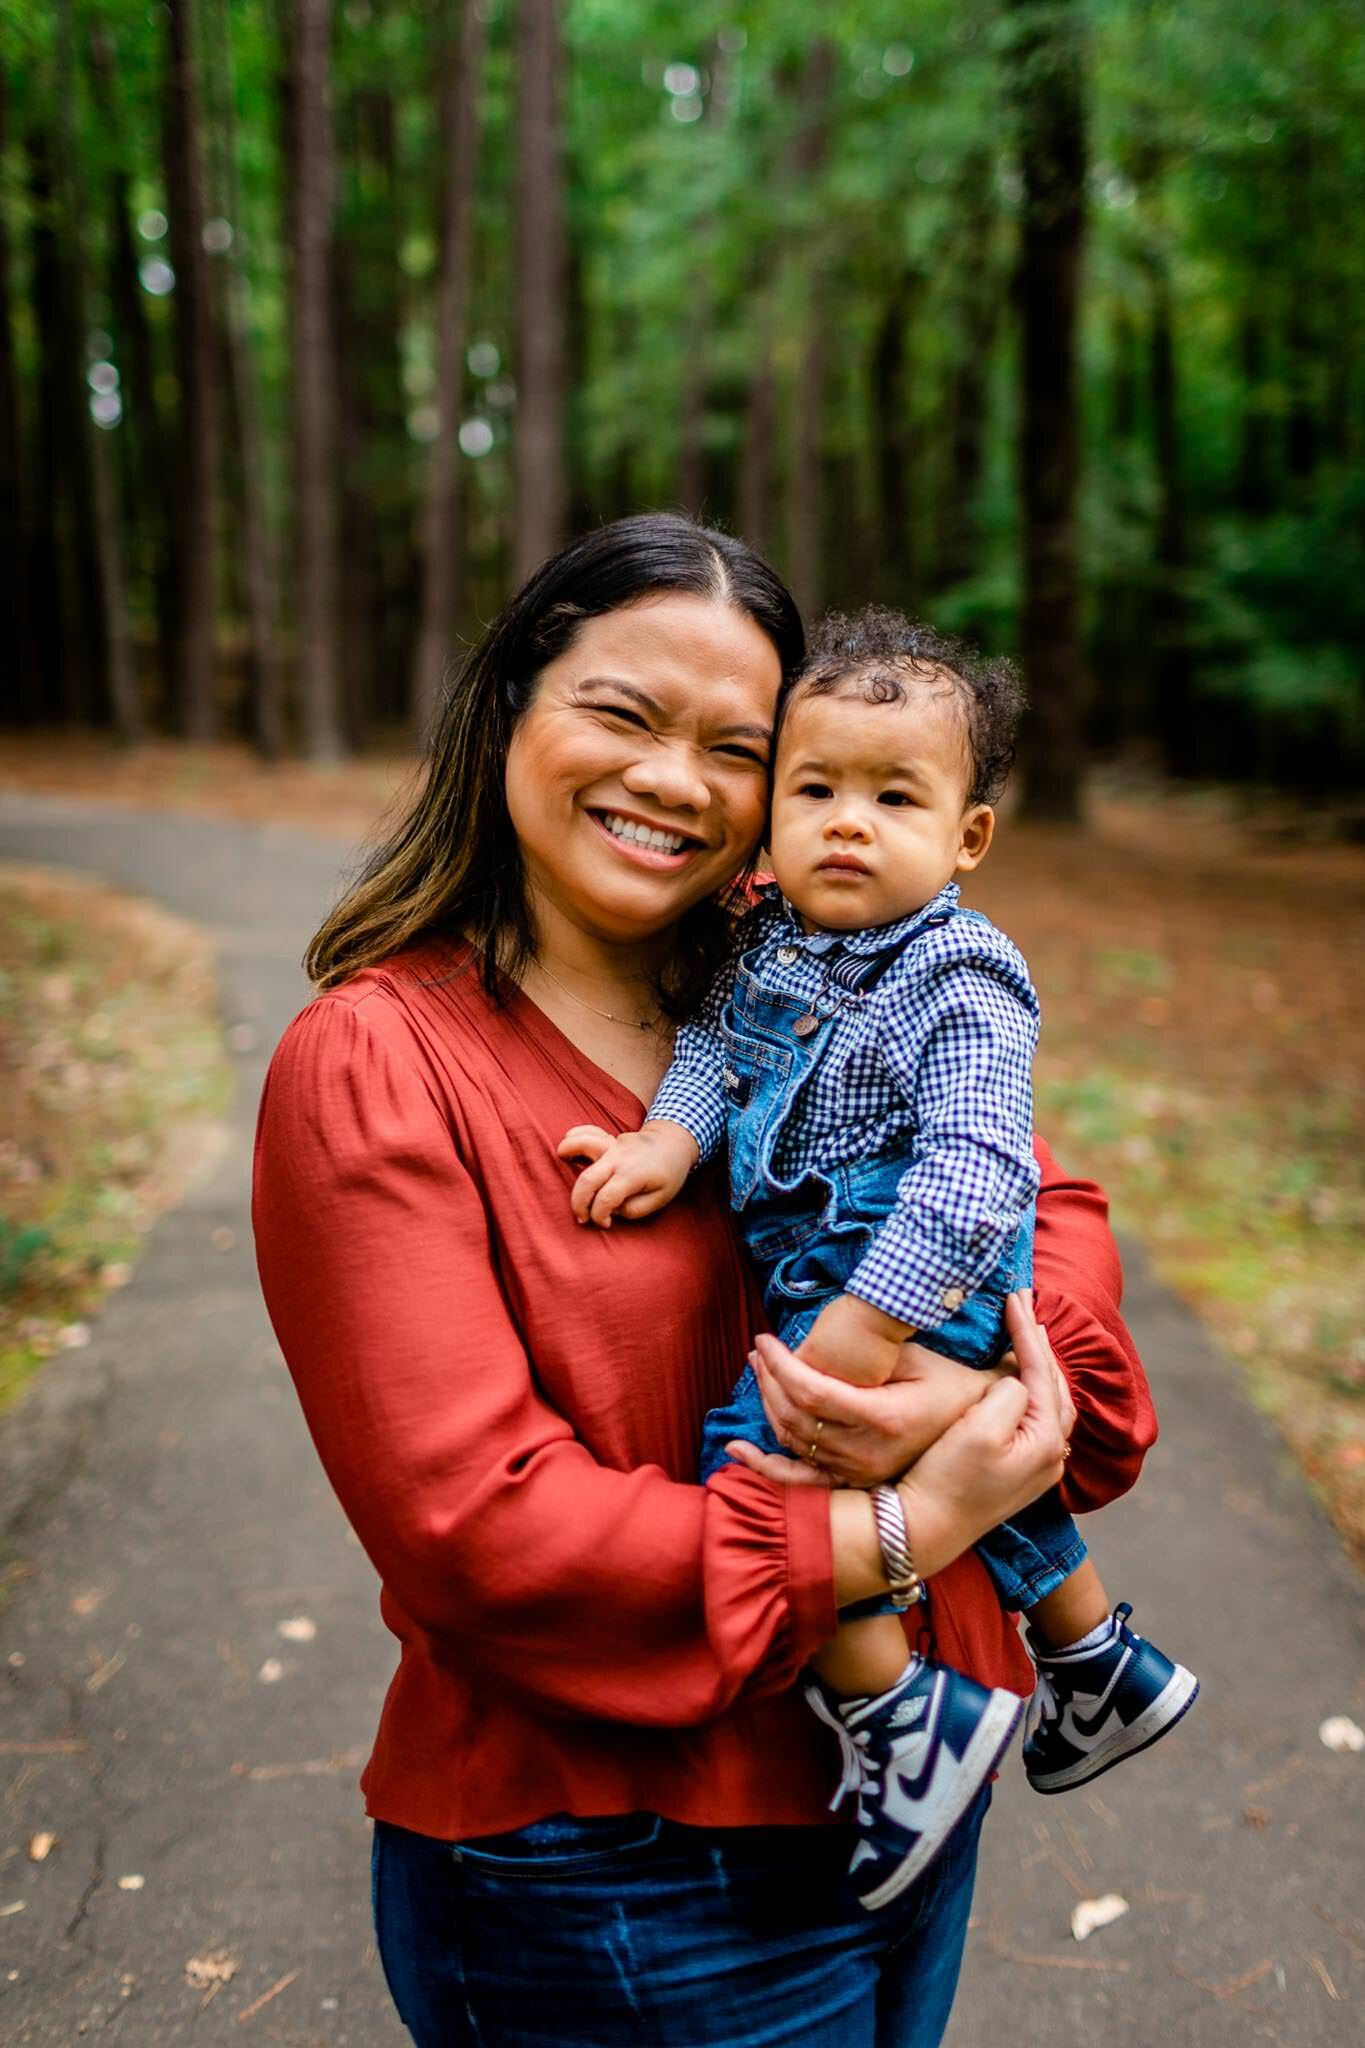 Raleigh Family Photographer | By G. Lin Photography | Umstead Park | Mother holding son in arms